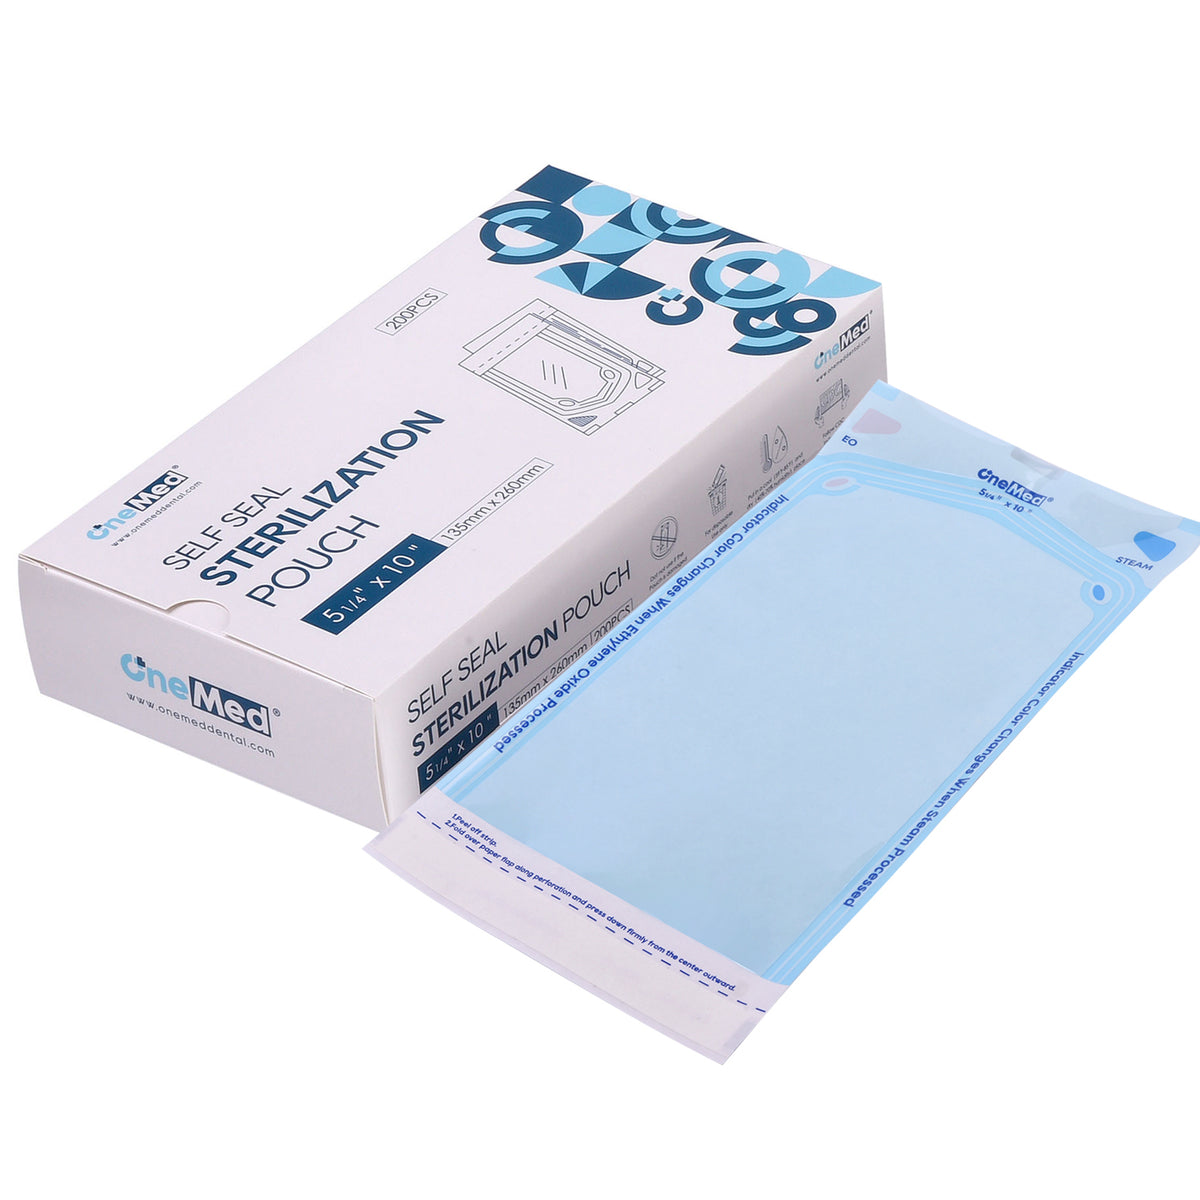 OneMed 5.25"x10" Self-Sealing Sterilization Pouches for Autoclave 800(4 Boxes)